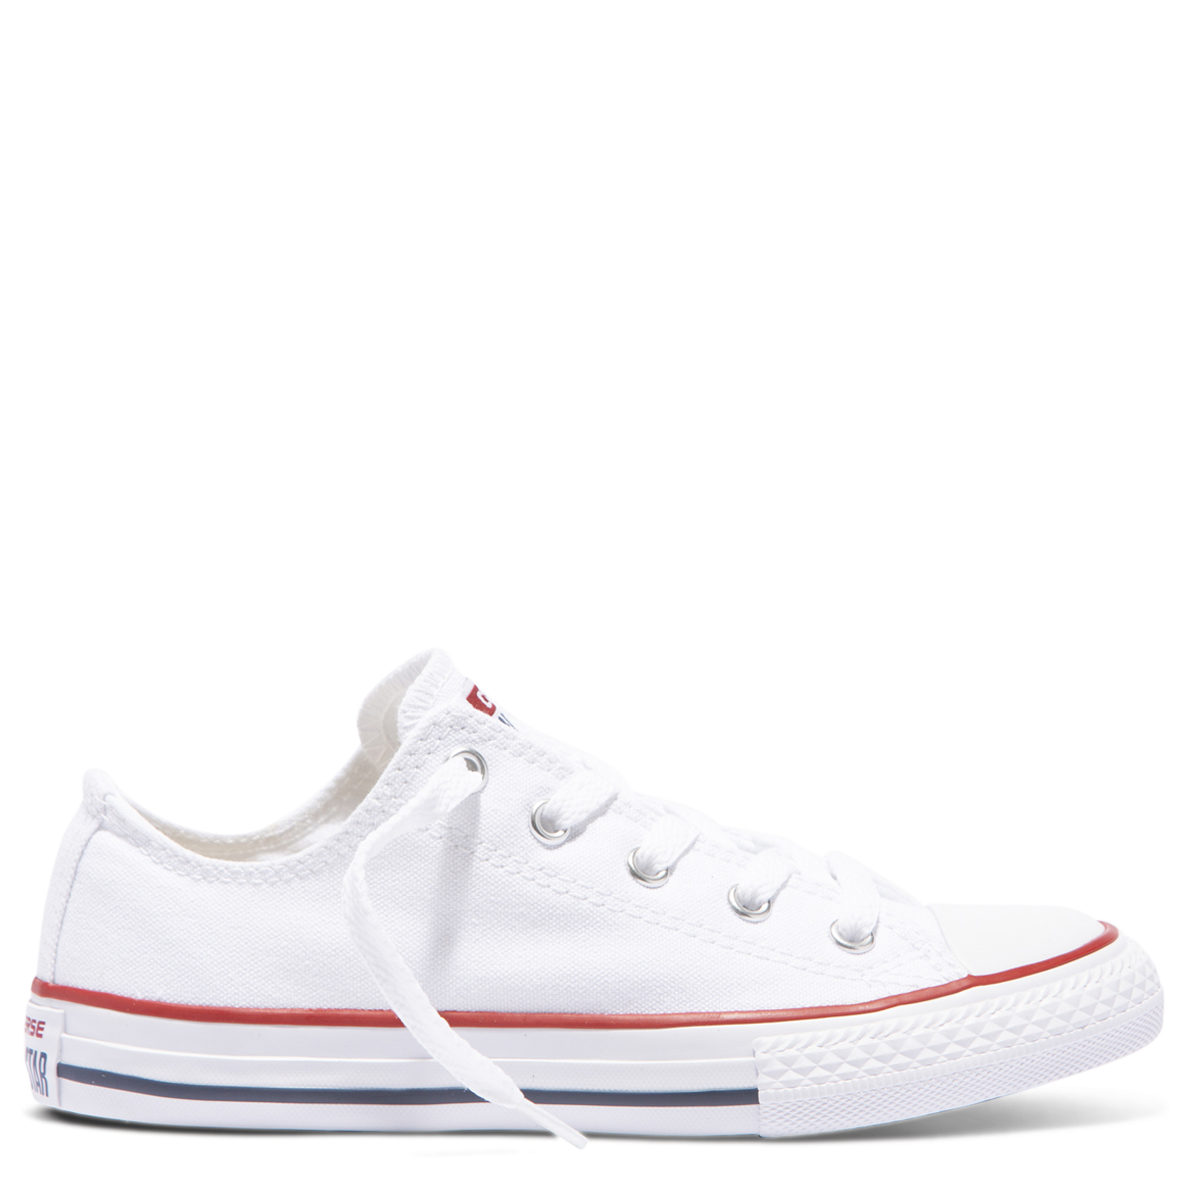 converse chuck taylor all star classic white low